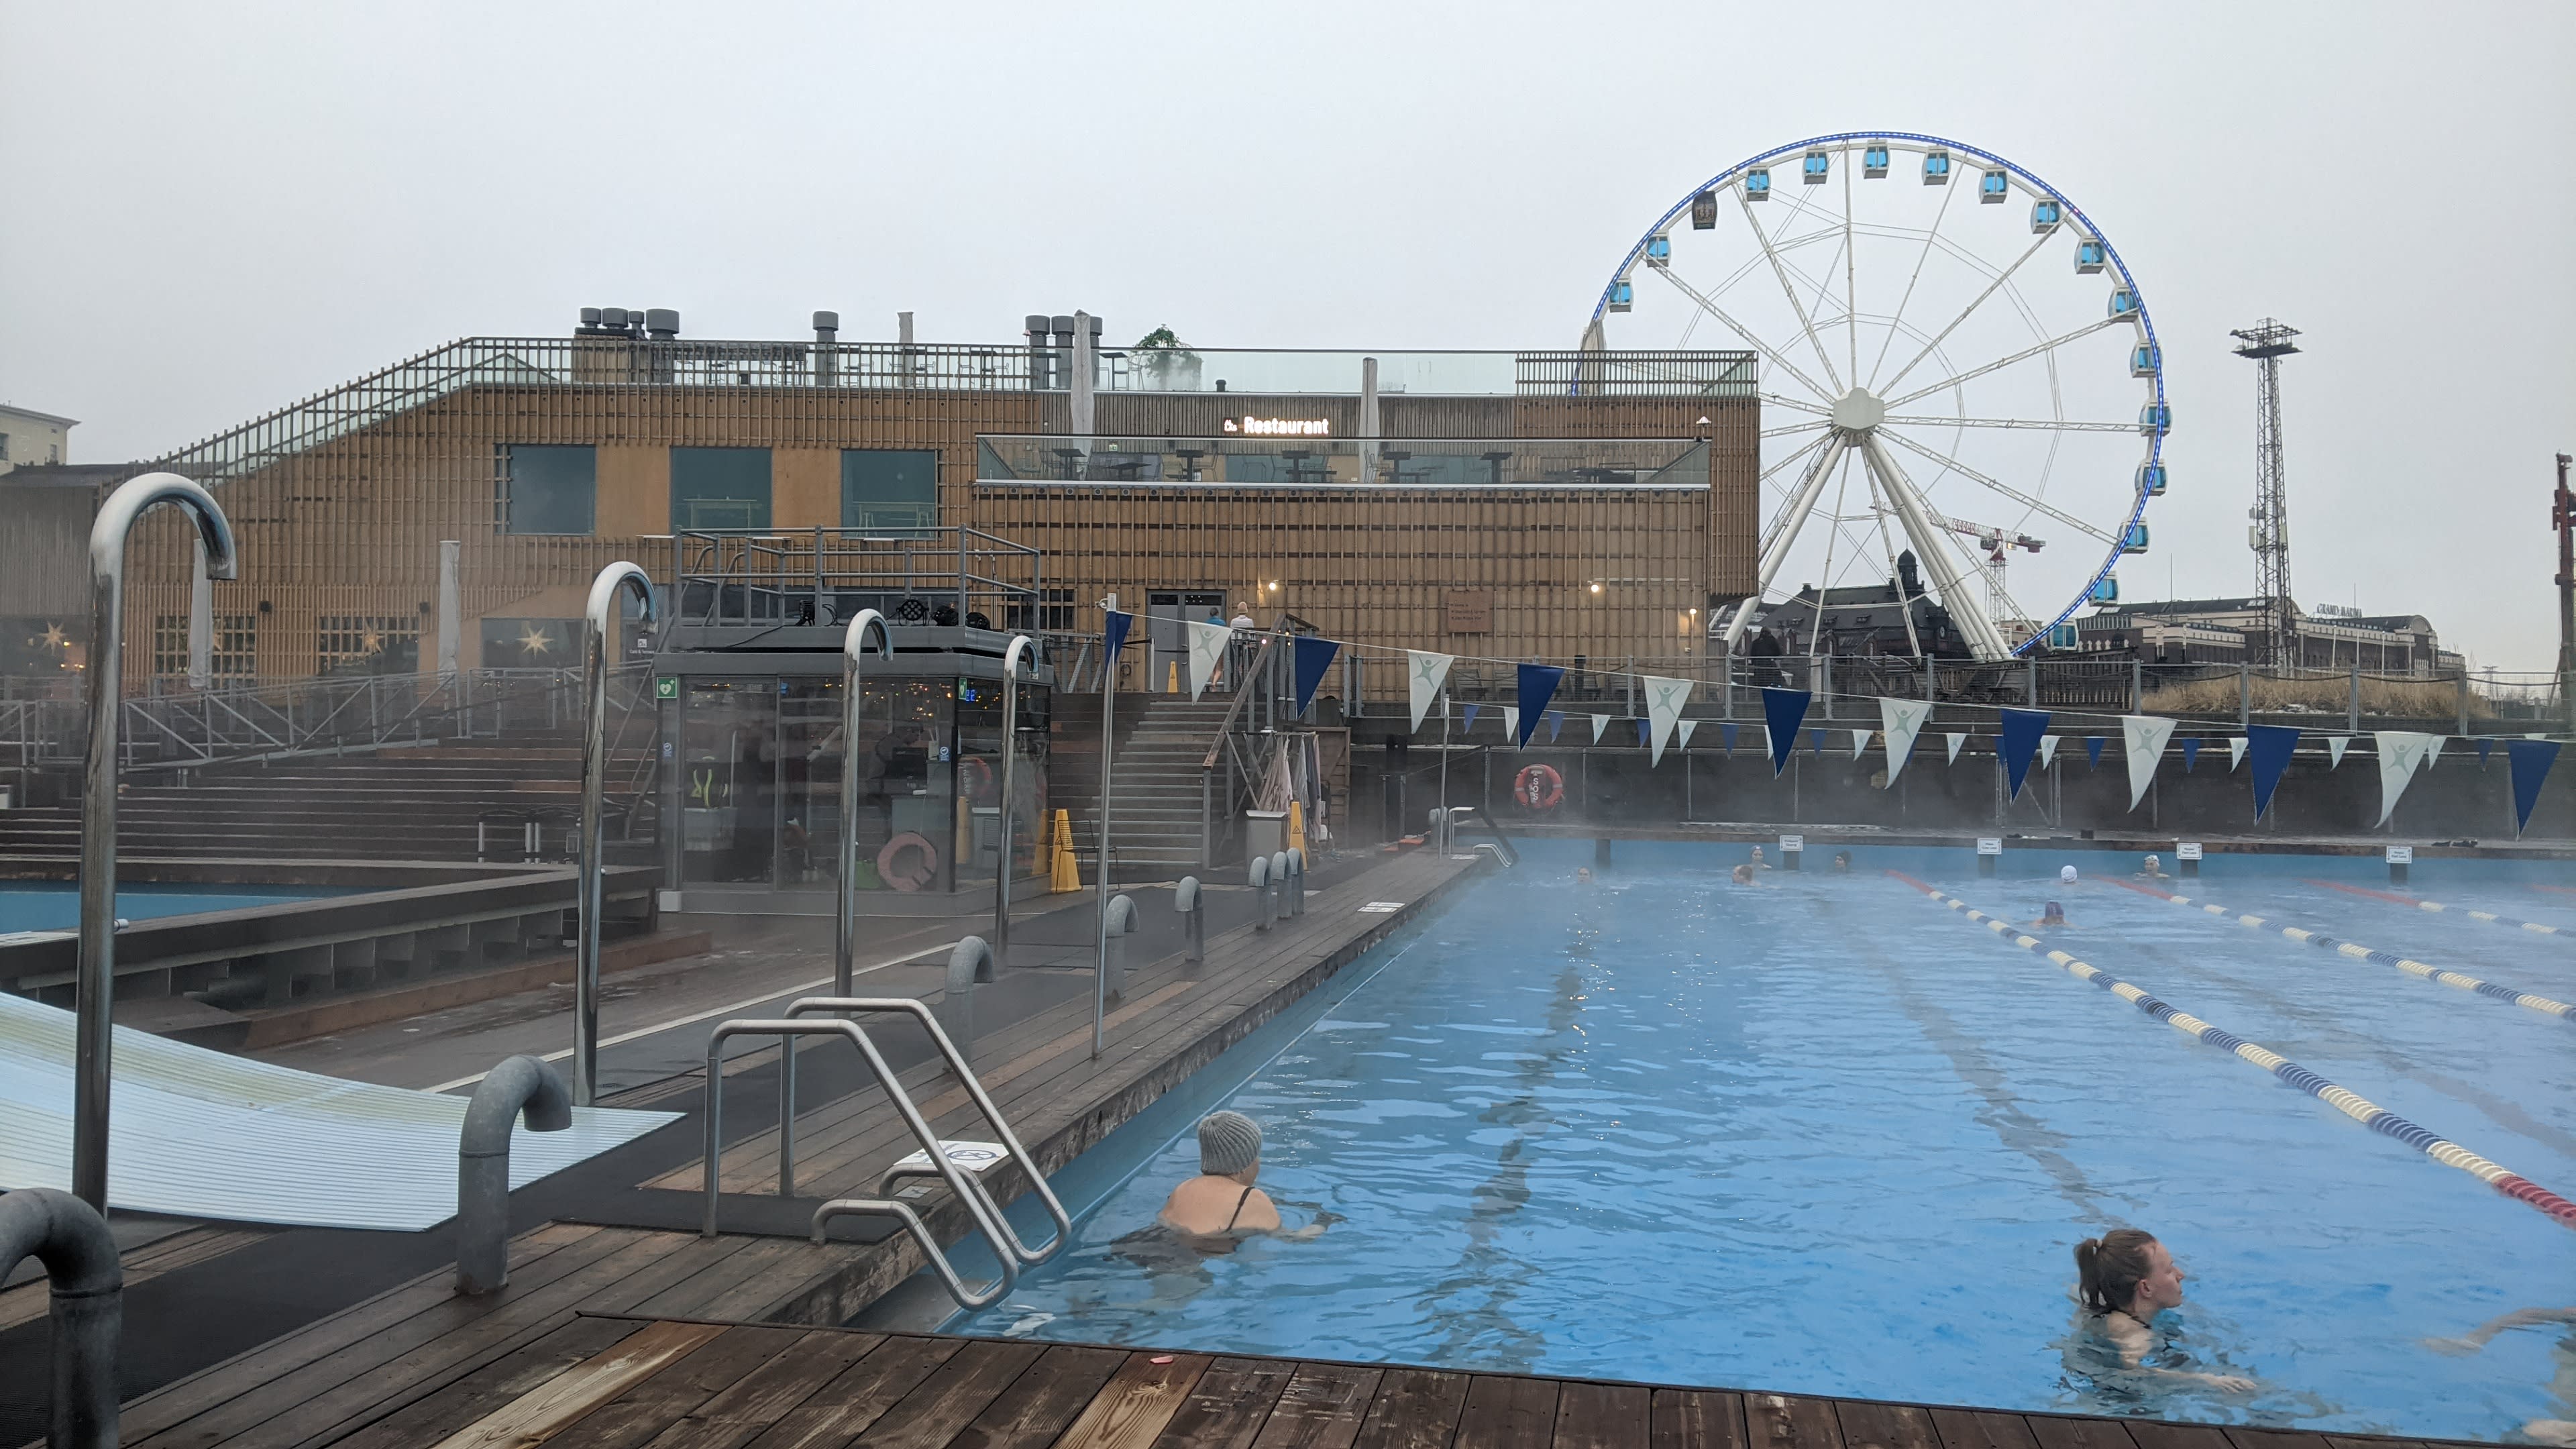 Viking Line denies liability for damages to the Pool Pool